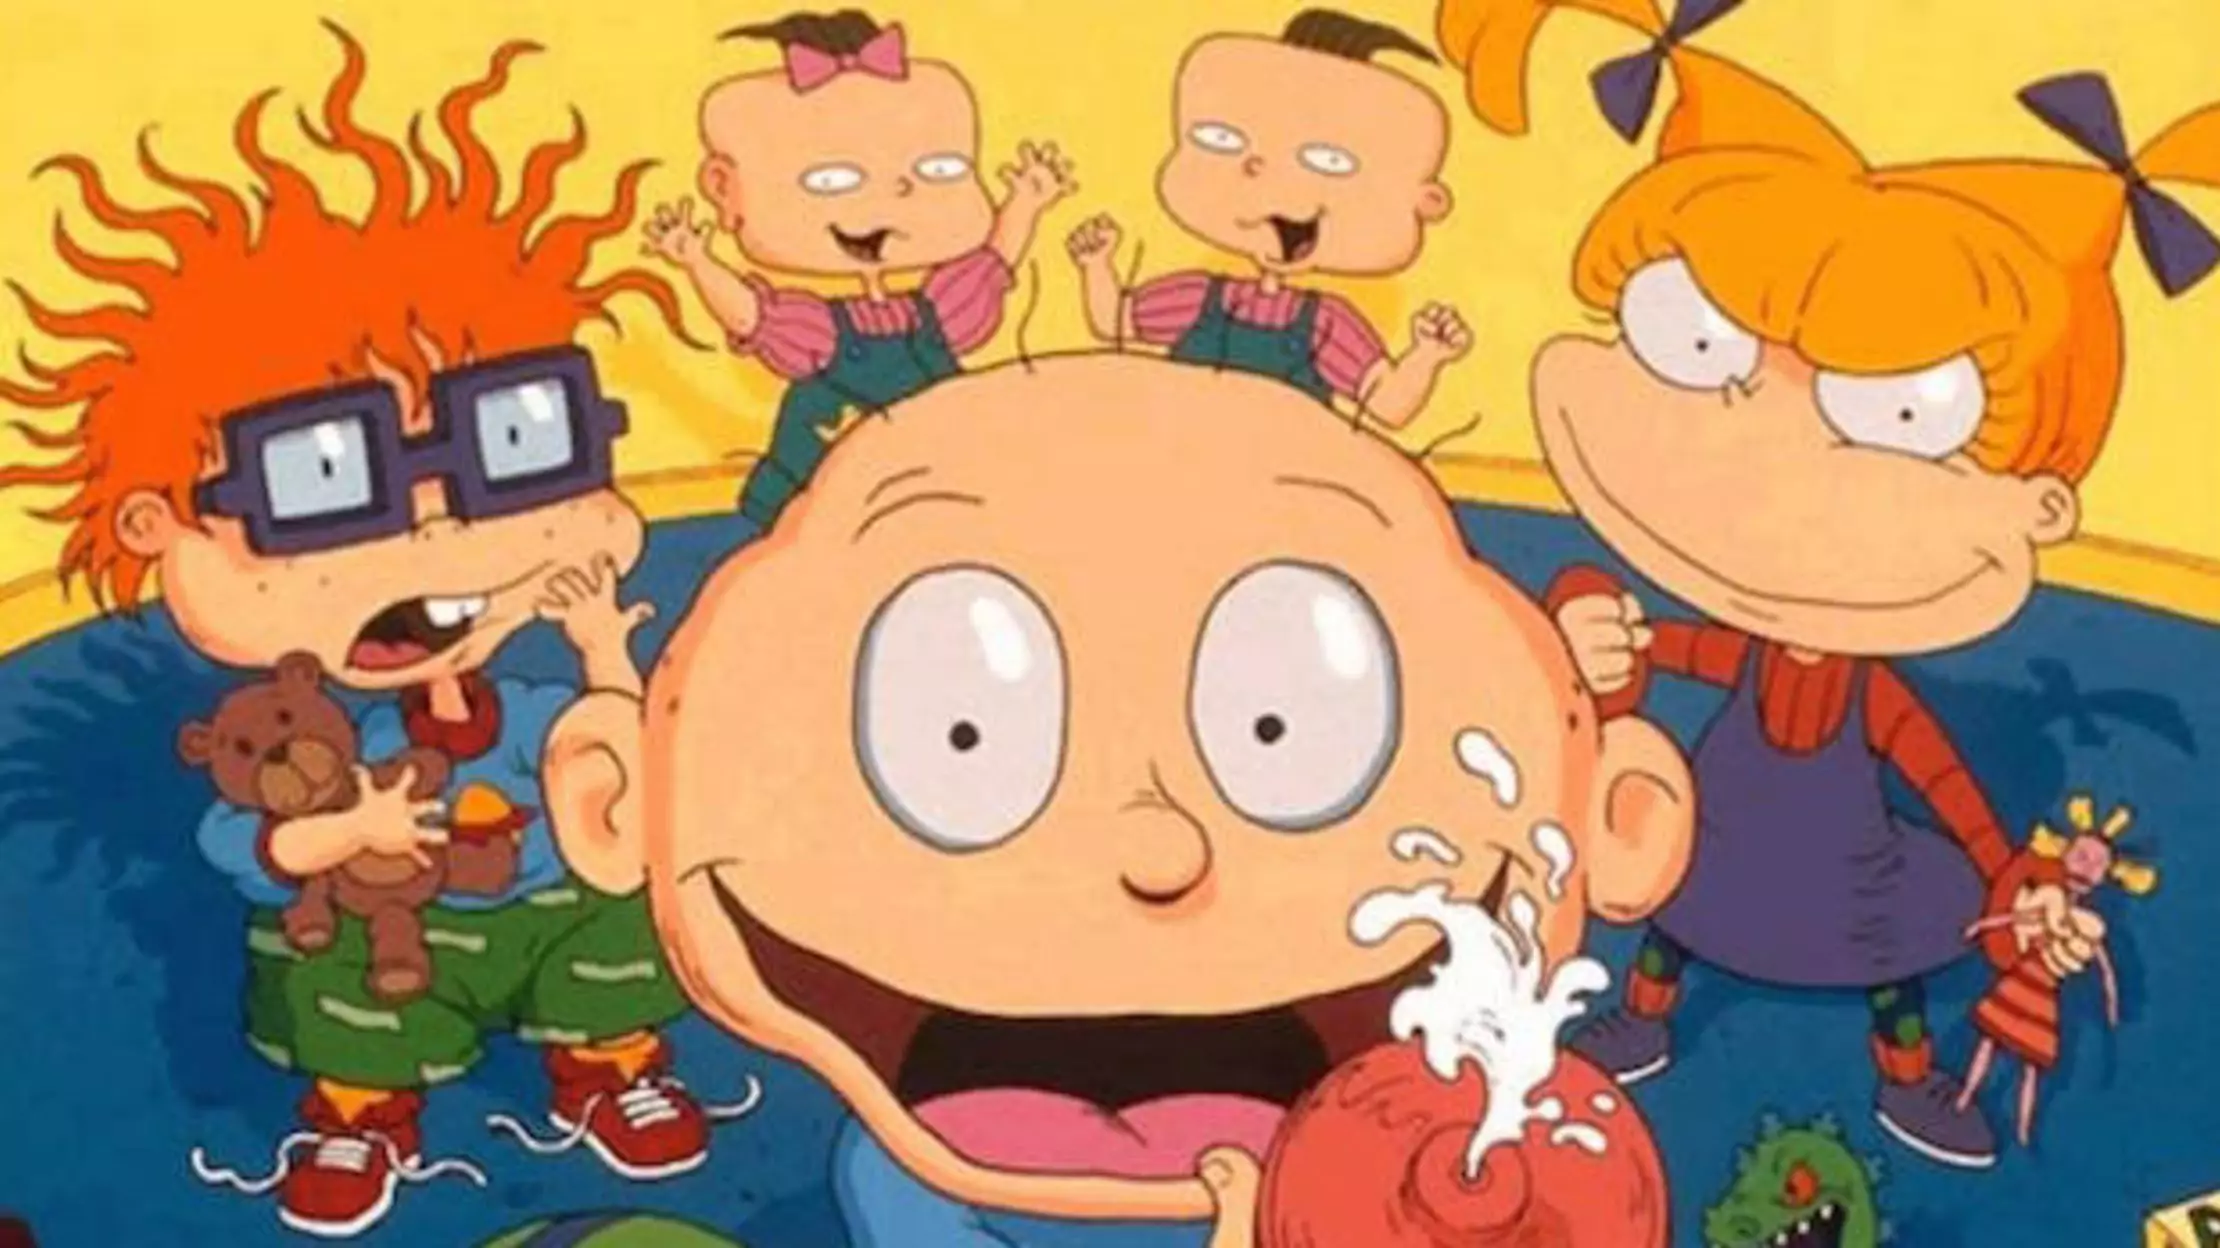 The First Episode Of The Rugrats Premiered On Nickelodeon 29 Years Ago